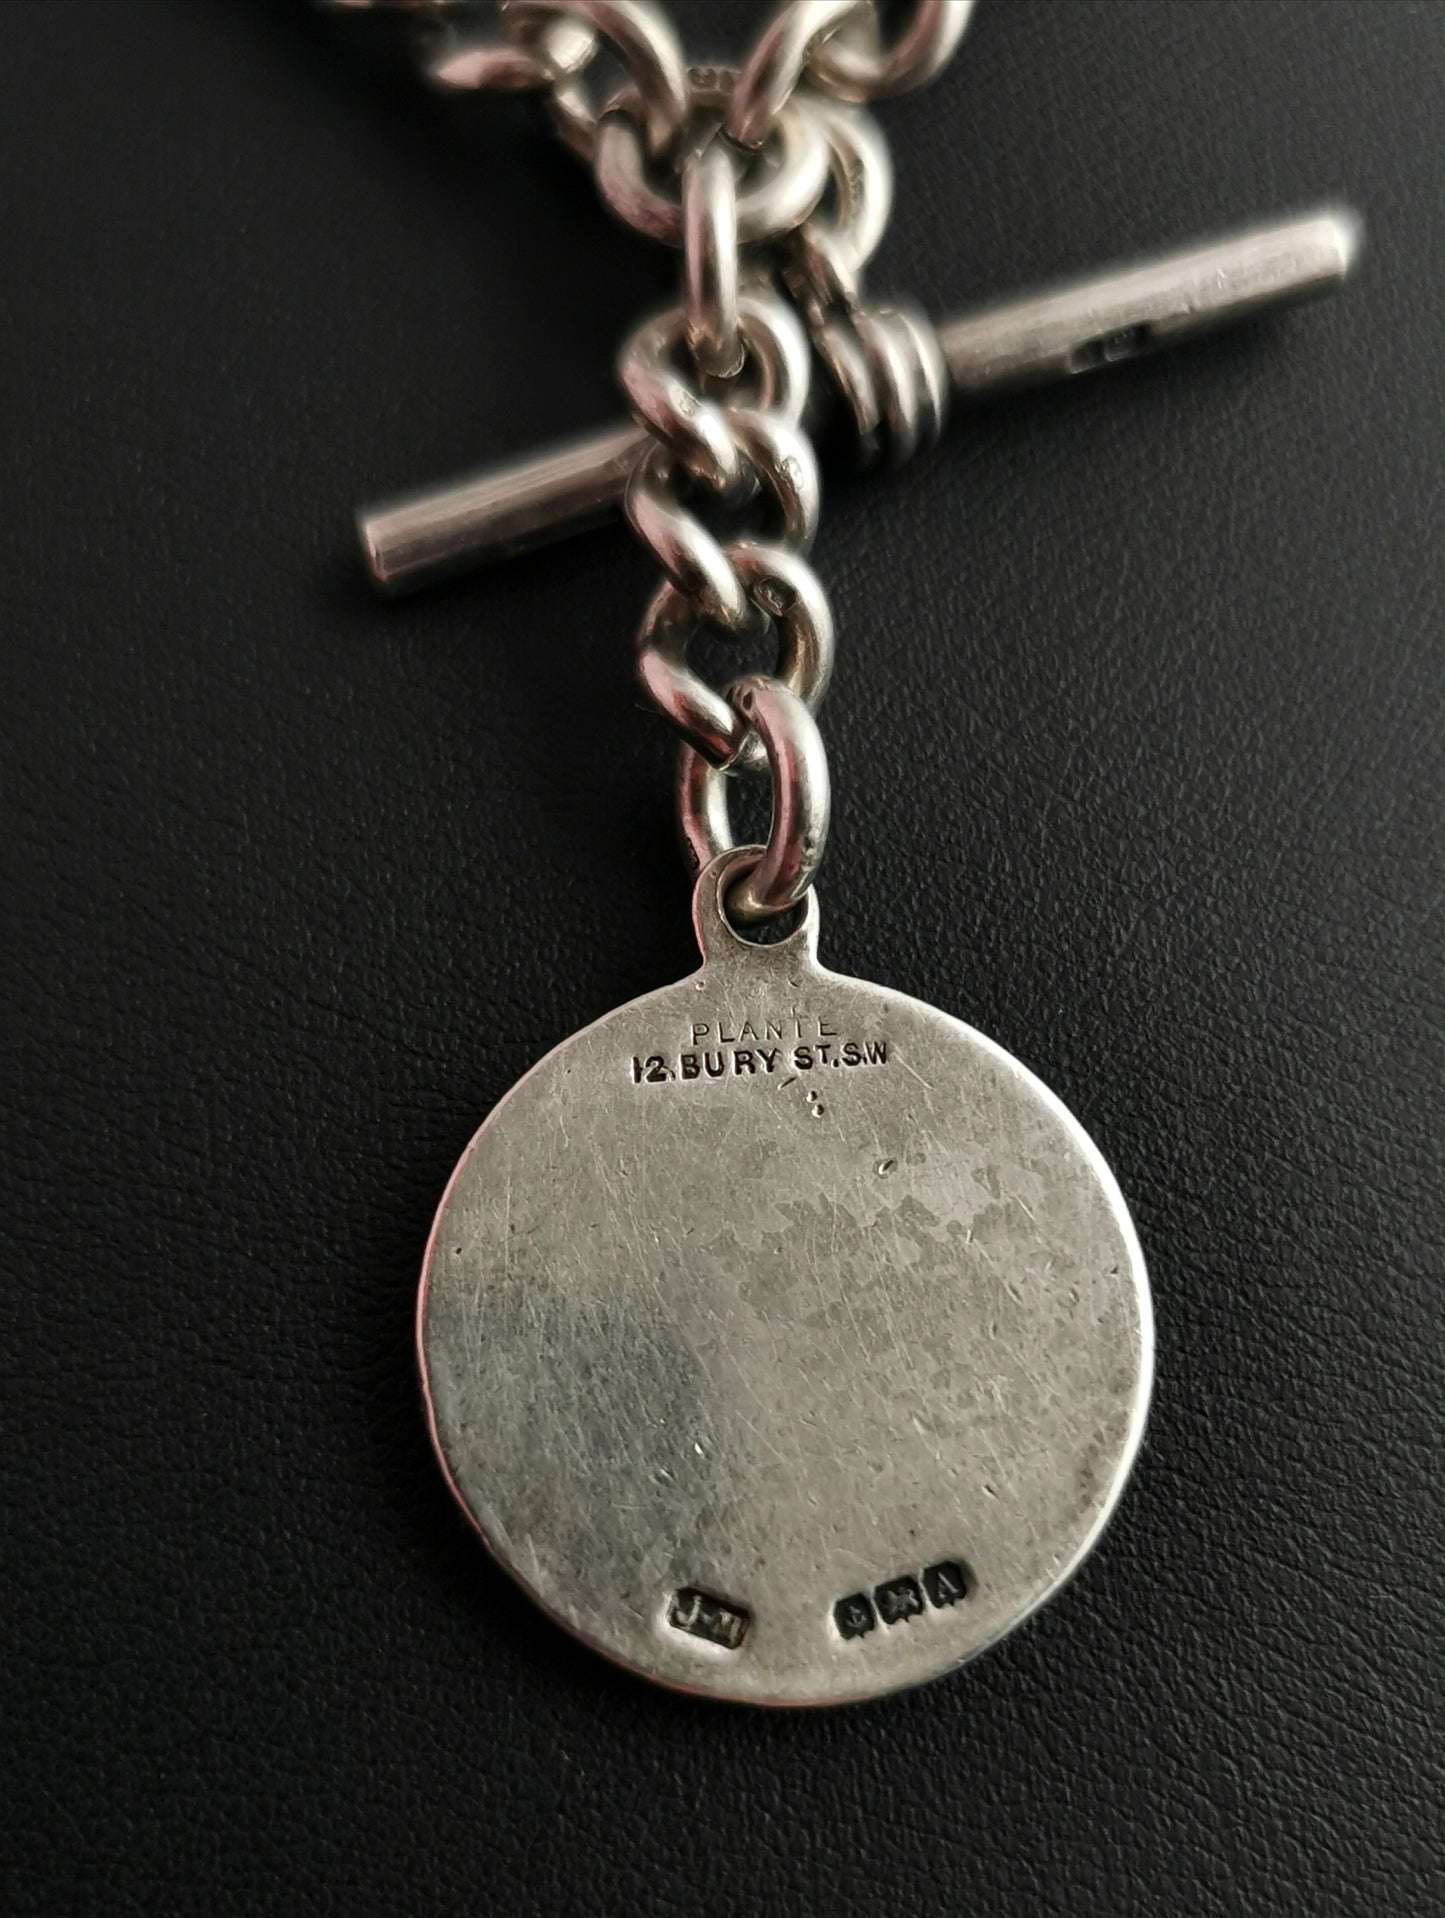 Antique silver Double Albert chain, enamelled silver fob